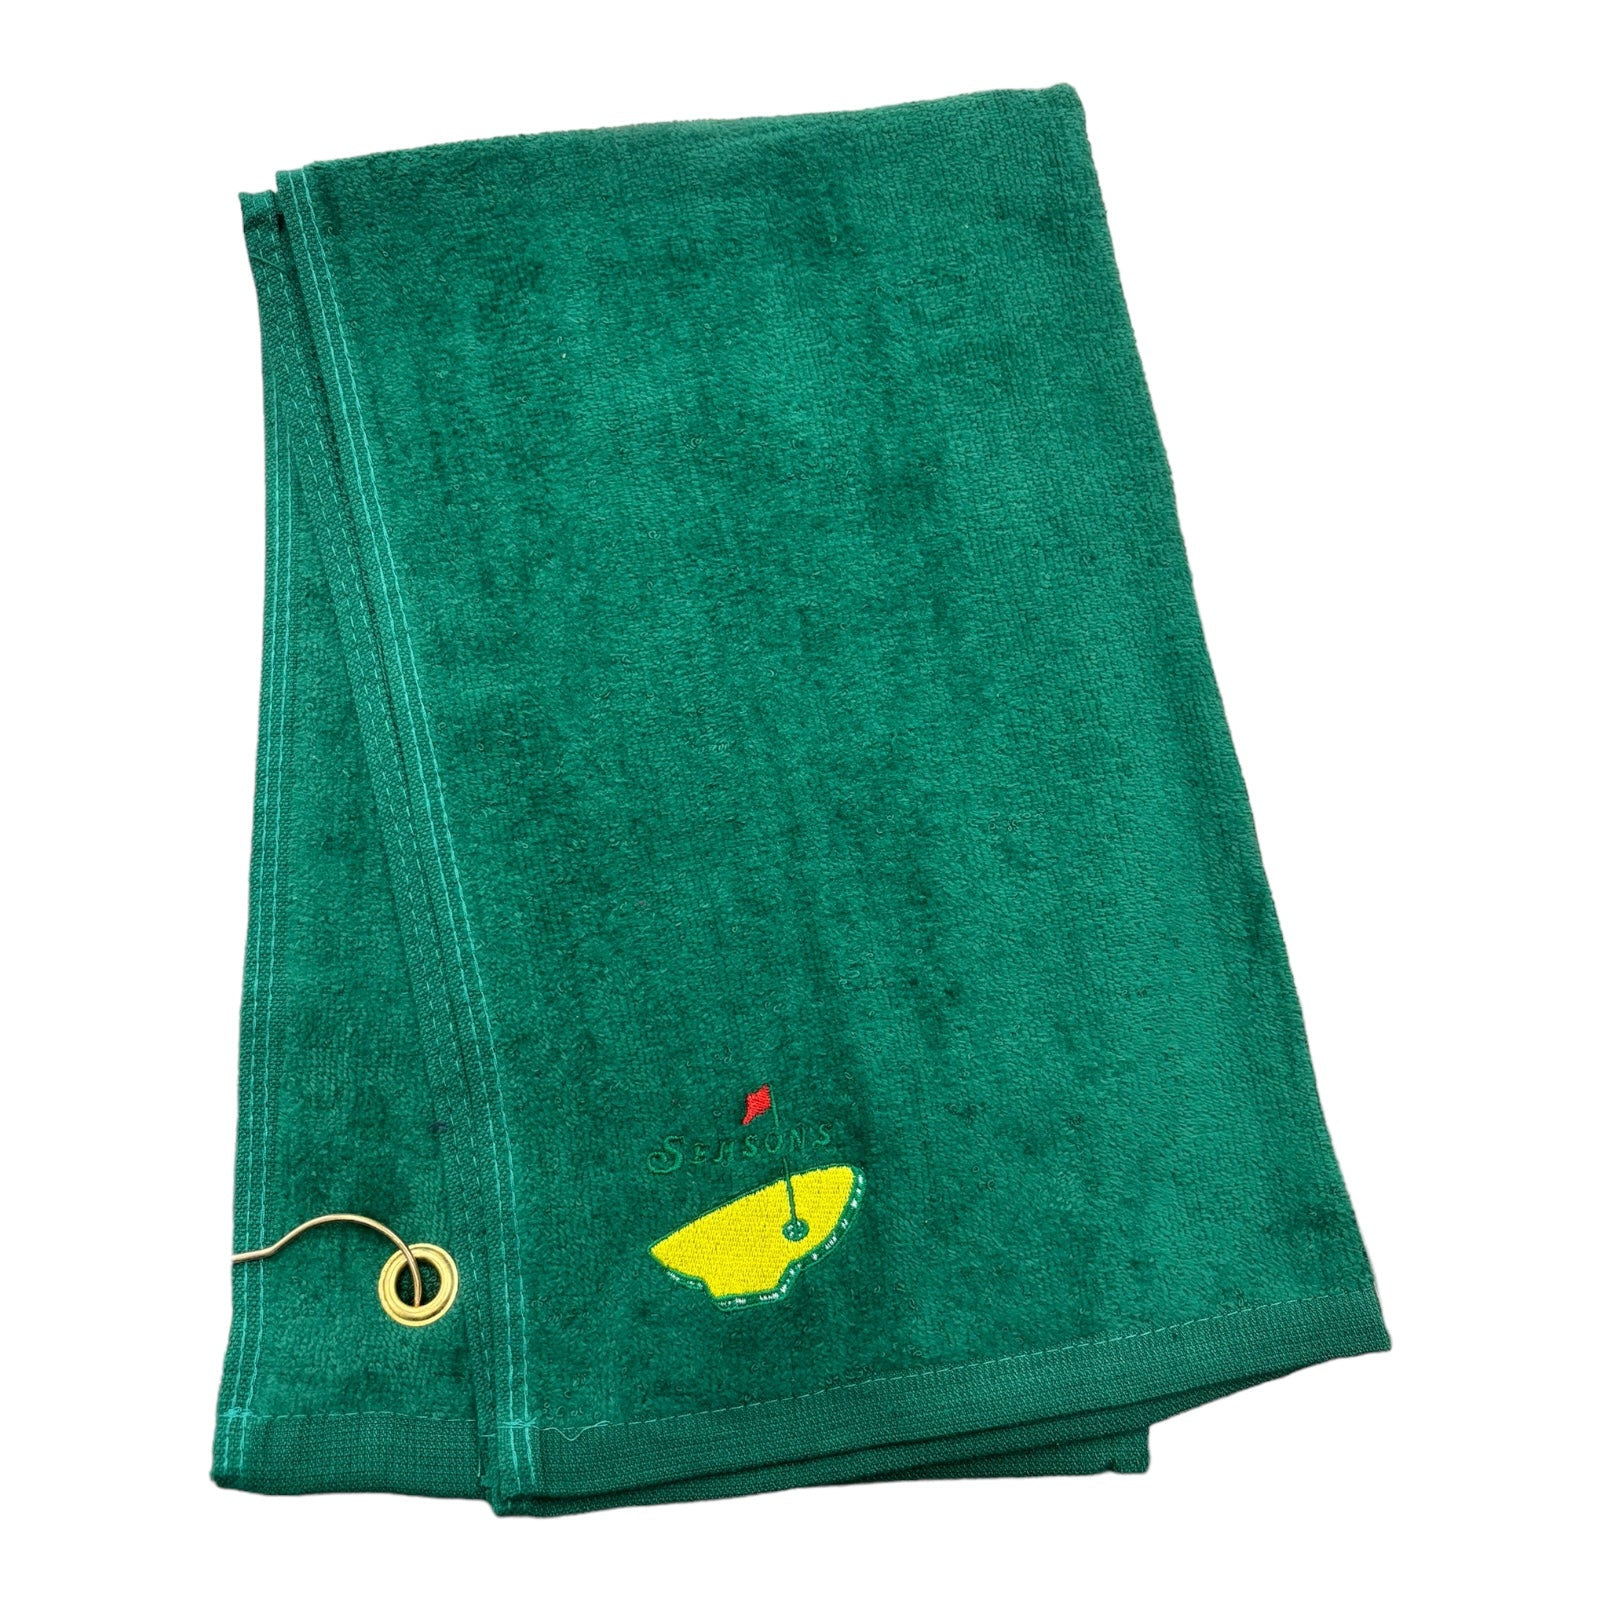 Green Golf Towel with Embroidered NYS Egg Logo Embroidered on it. 